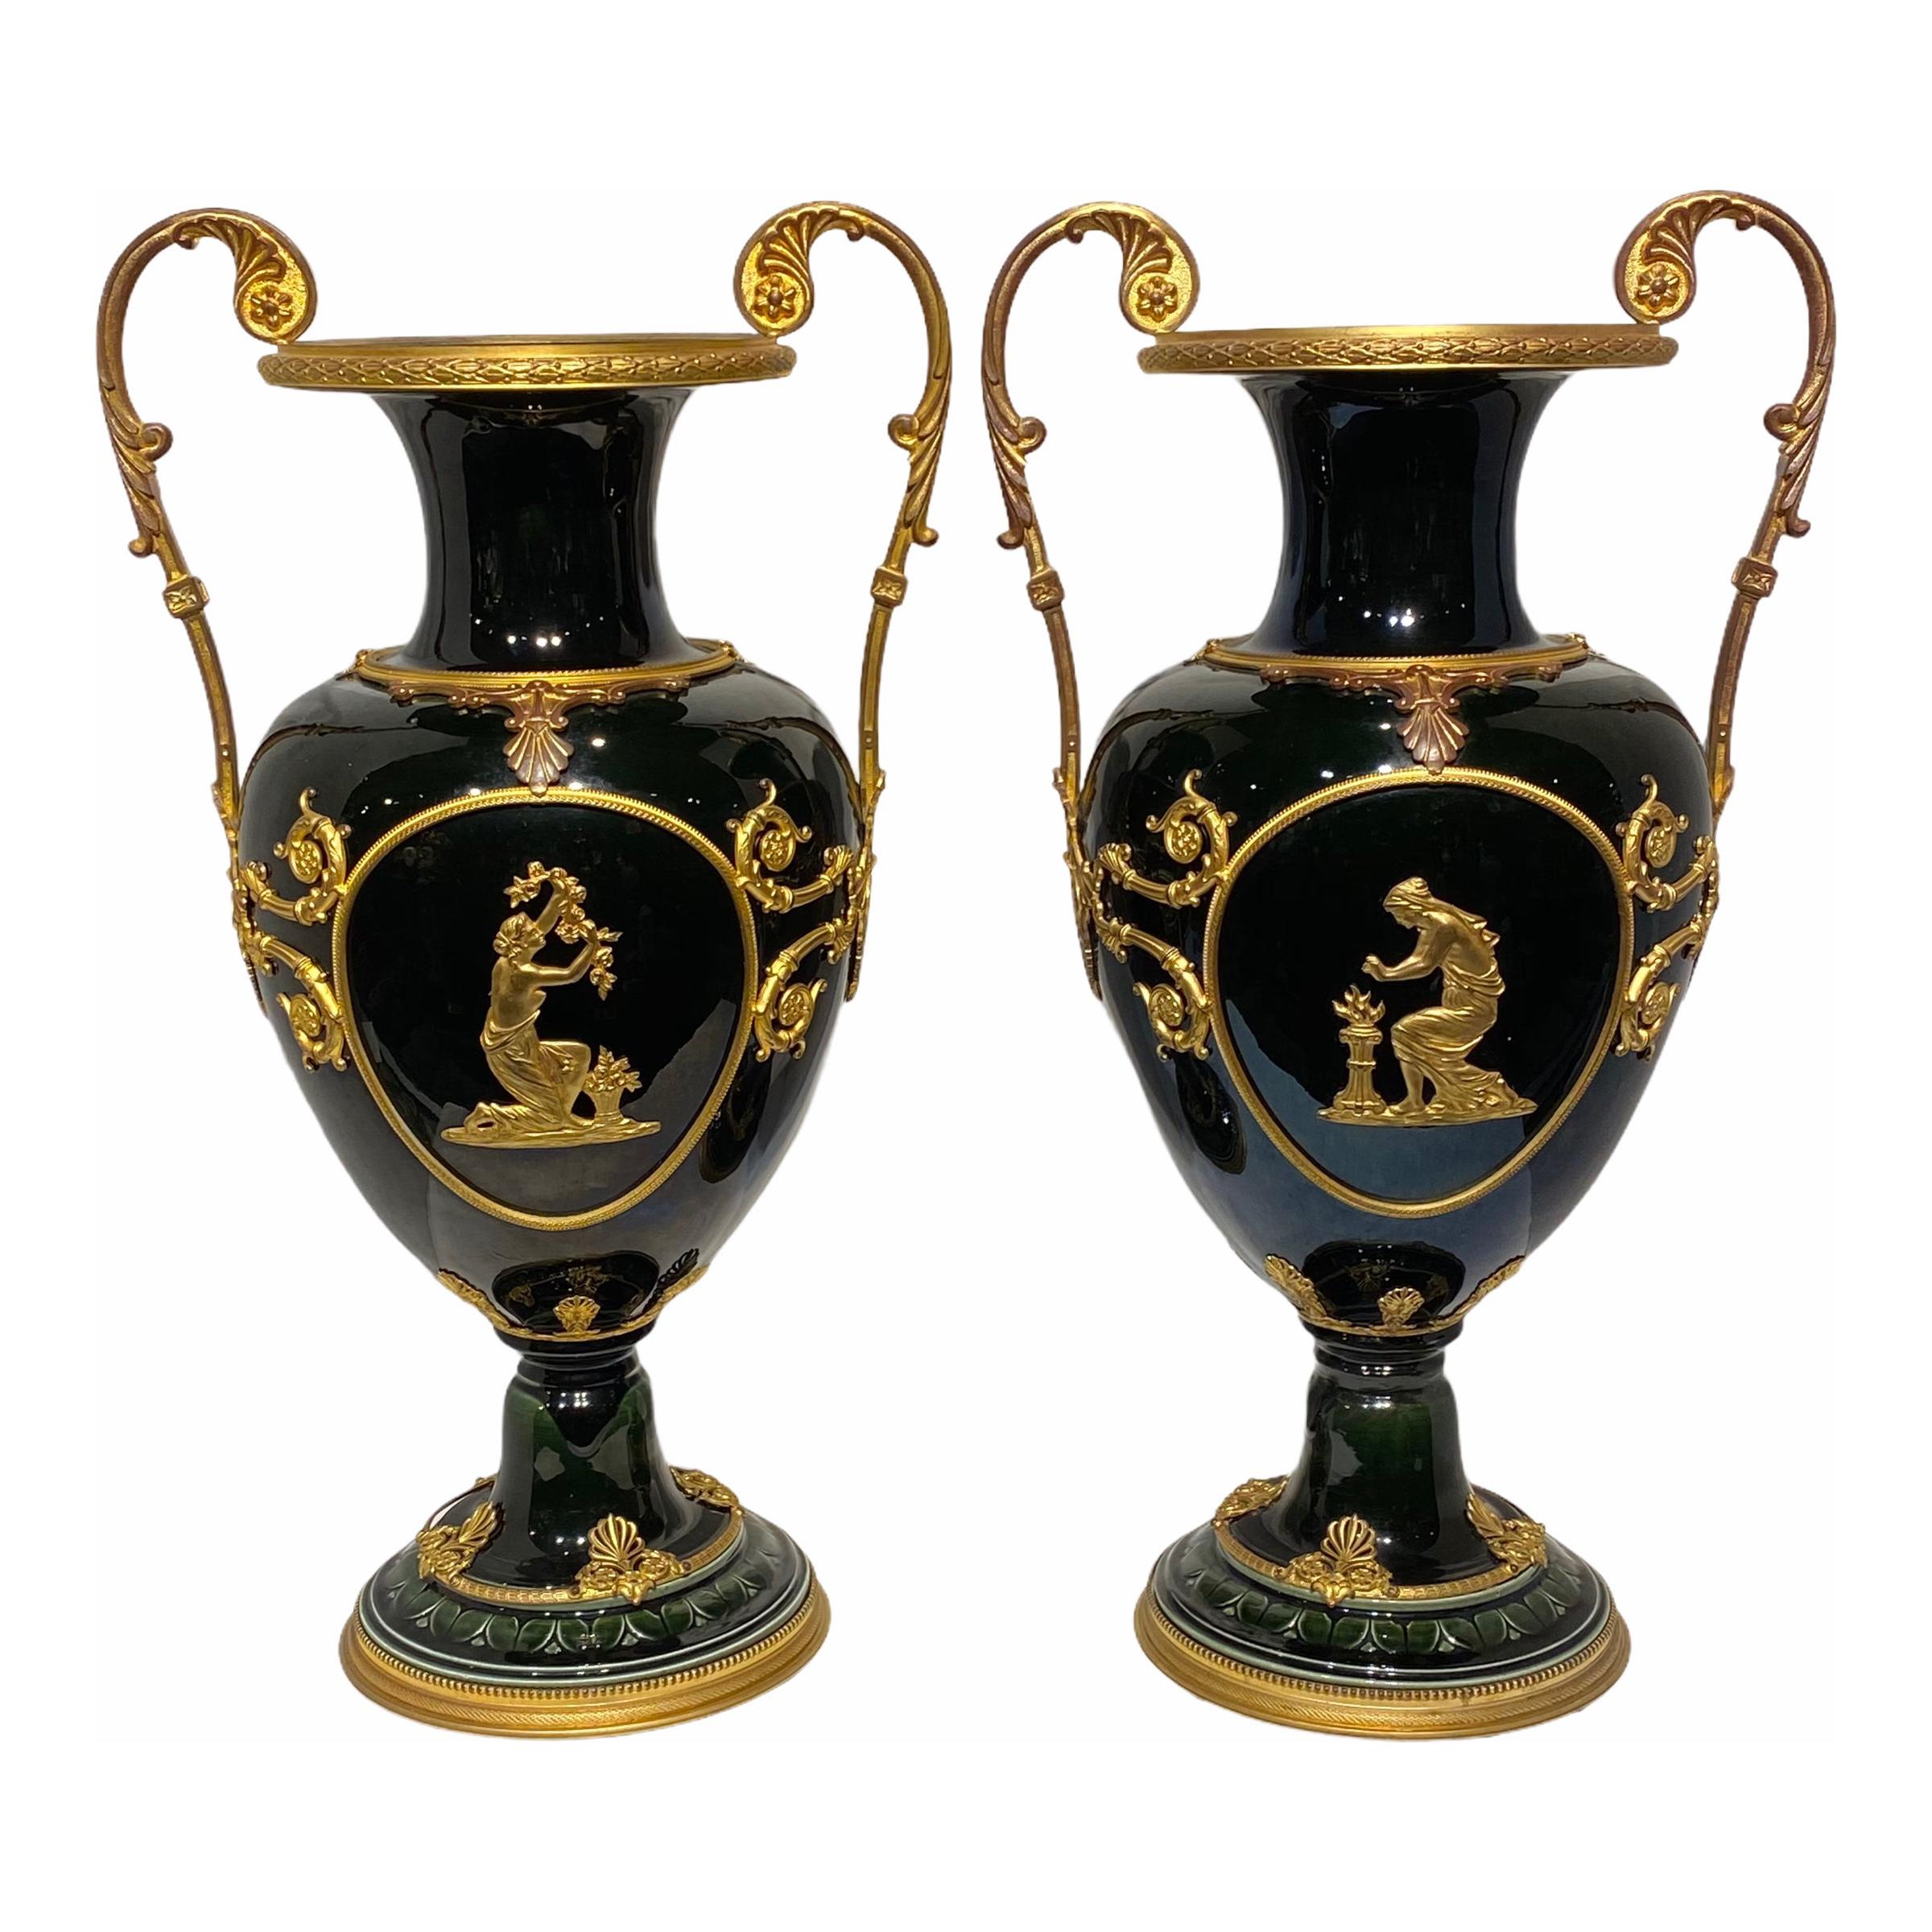 Iridescent Glazed Faience Vases with Neoclassical Gilt Bronze Mounts